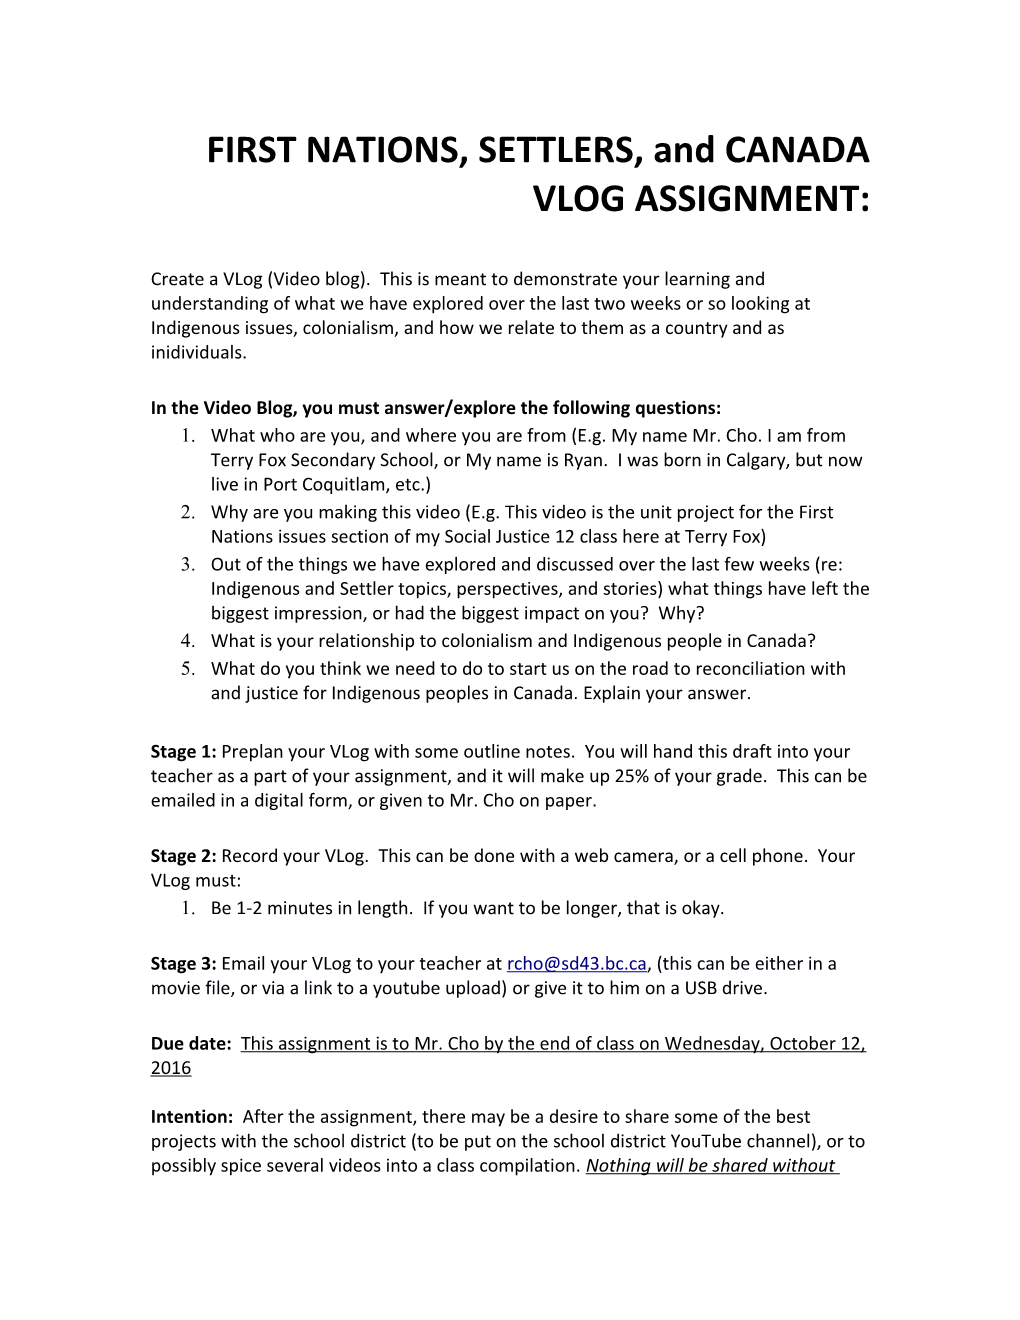 FIRST NATIONS, SETTLERS, and CANADA VLOG ASSIGNMENT